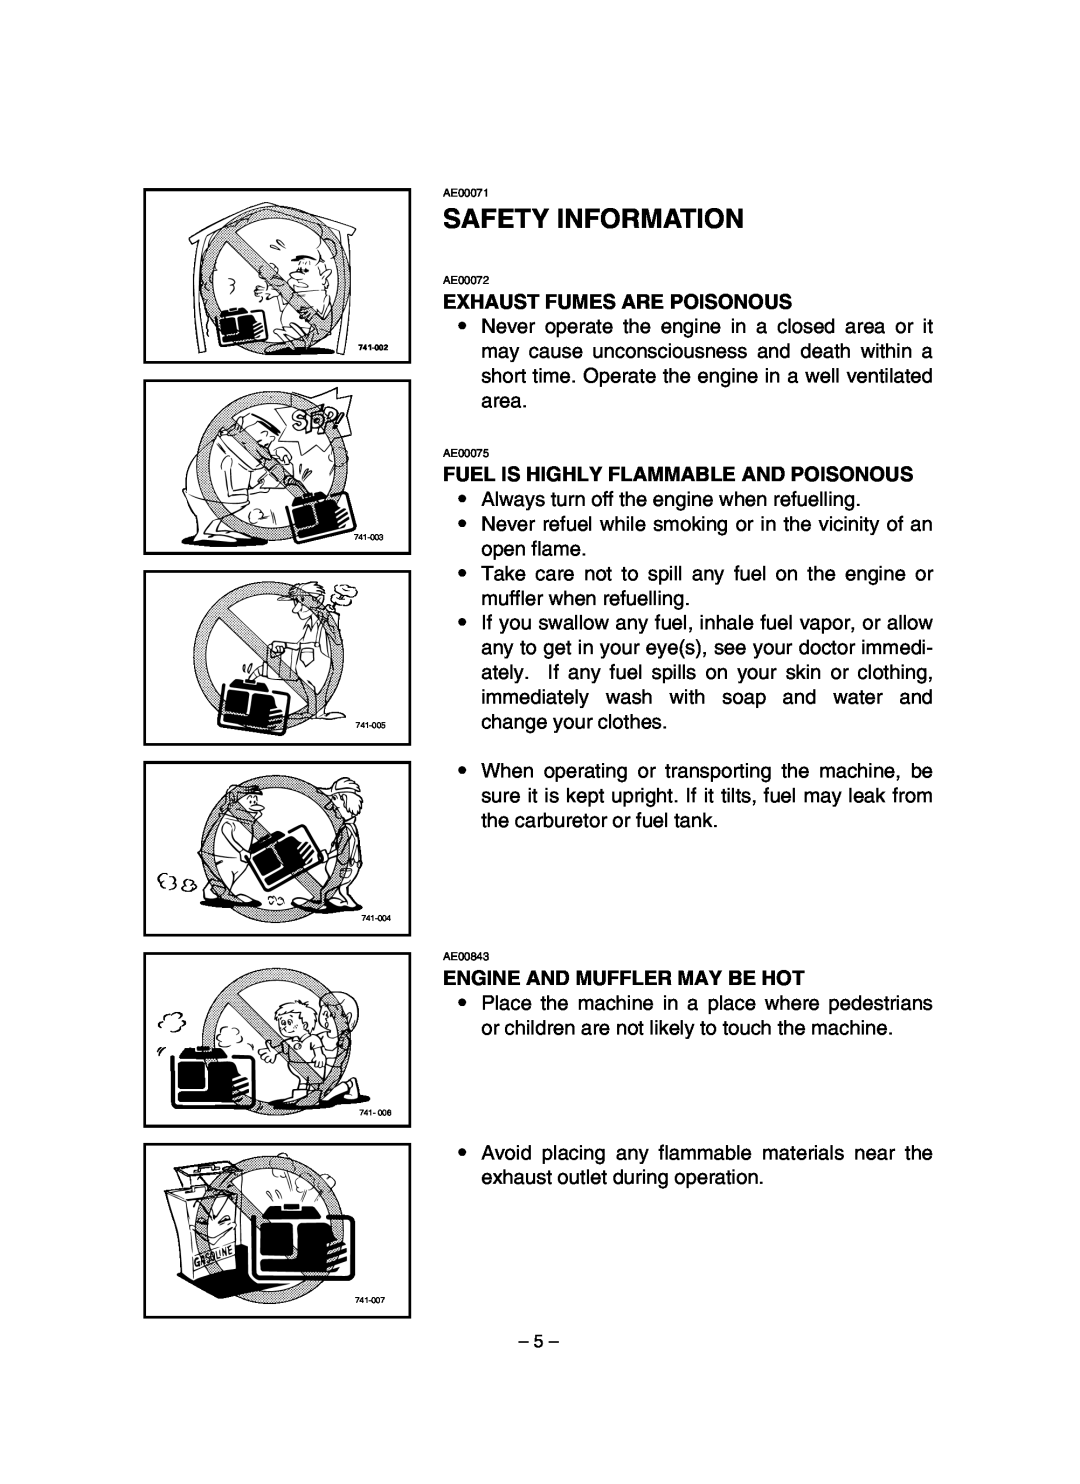 Yamaha EF1600, EF2600, YG2600 Safety Information, Exhaust Fumes Are Poisonous, Fuel Is Highly Flammable And Poisonous 